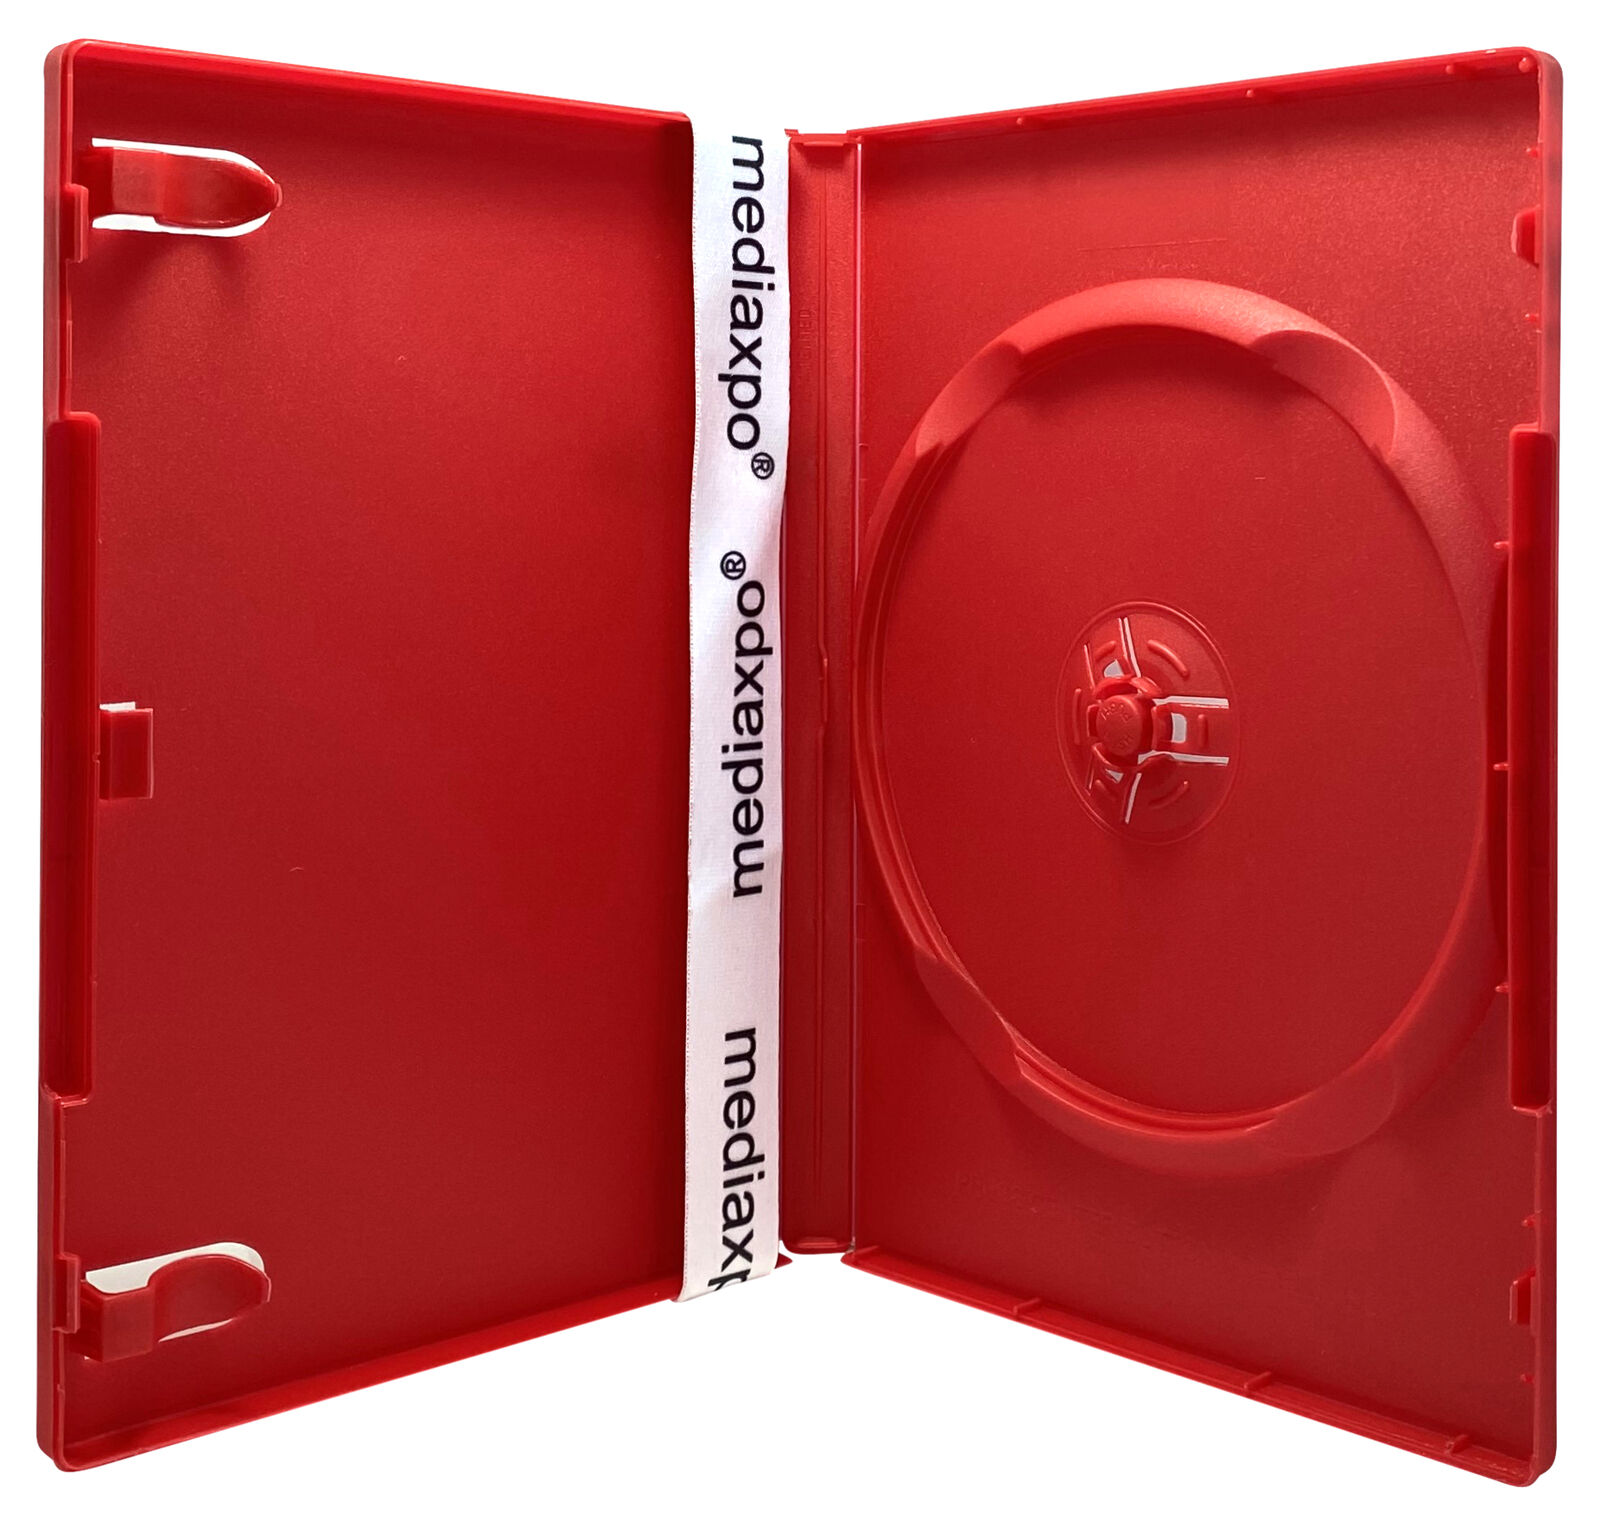 STANDARD Solid Red Color Single DVD Cases Lot